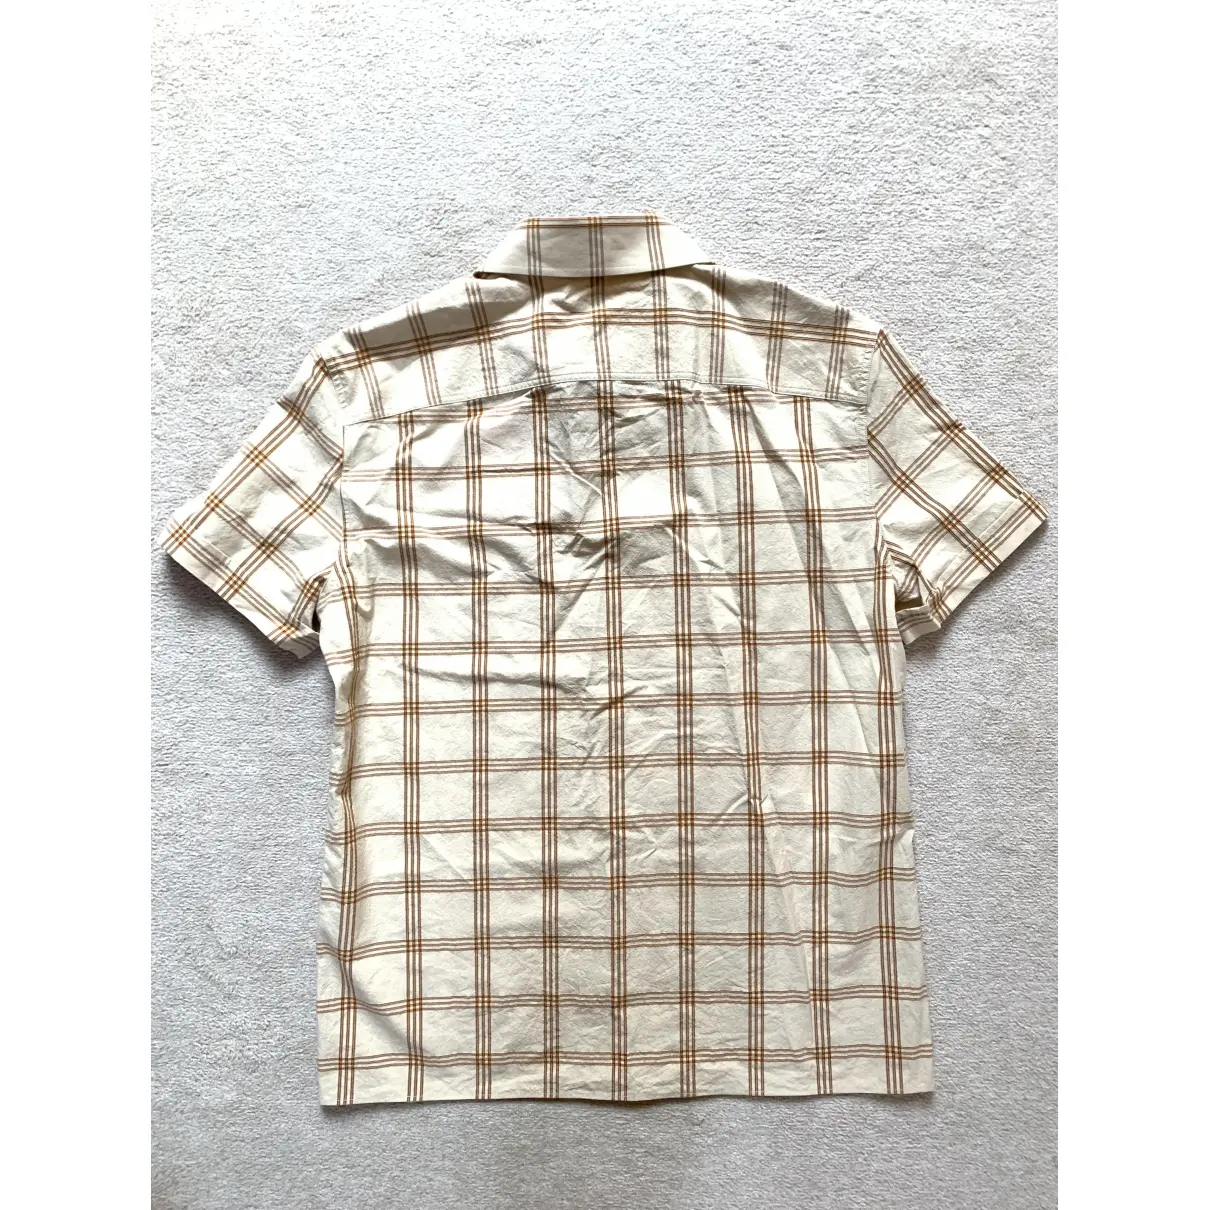 Buy The North Face x Gucci Shirt online